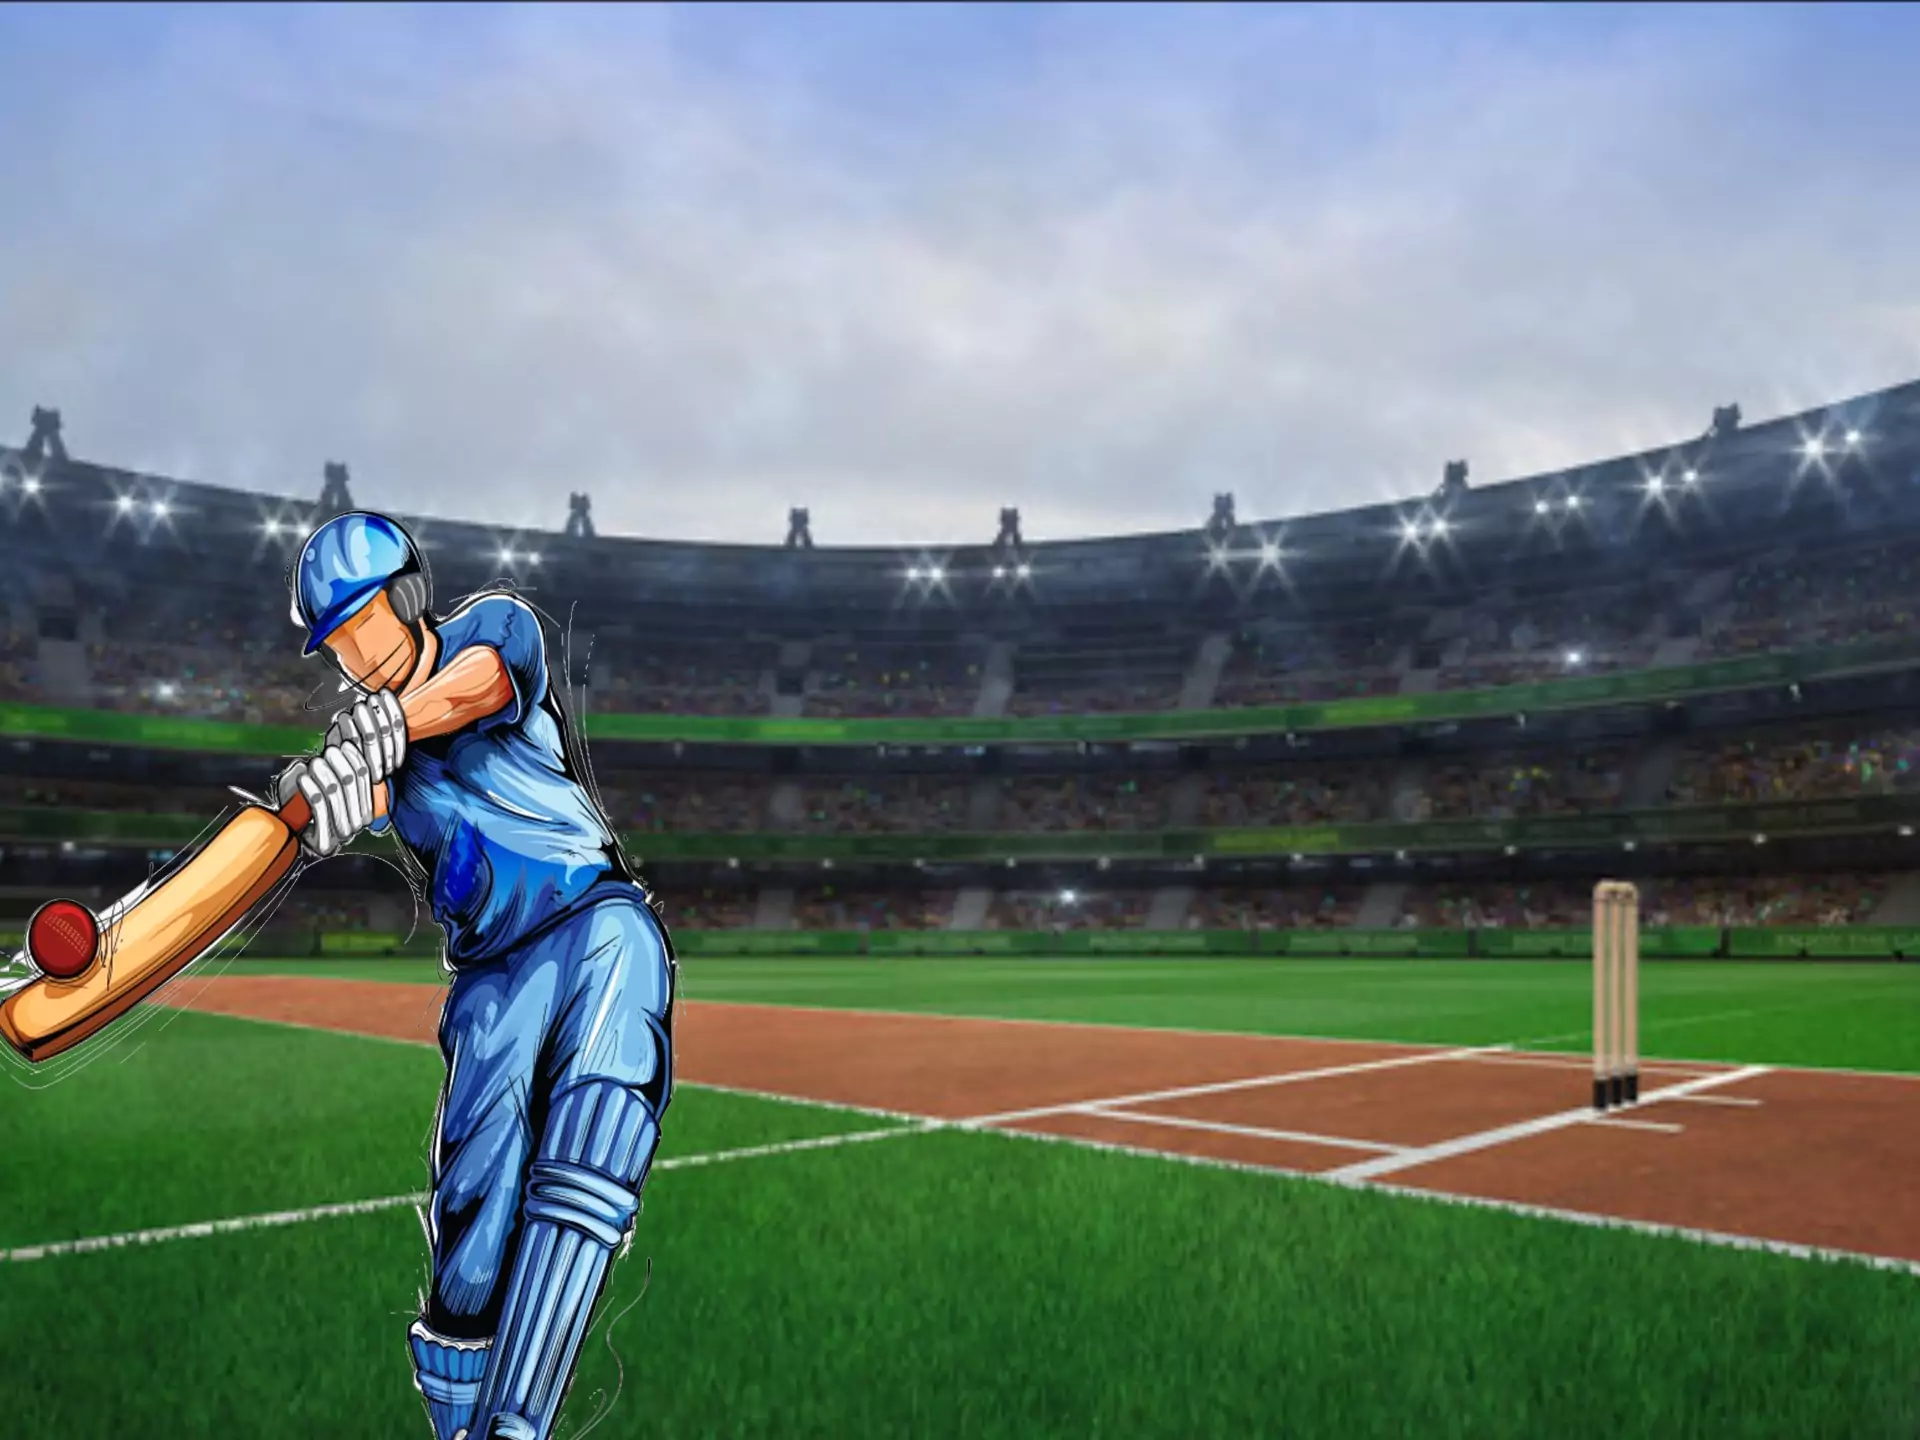 Learn more about stadiums and pitches for cricket before placing a bet.